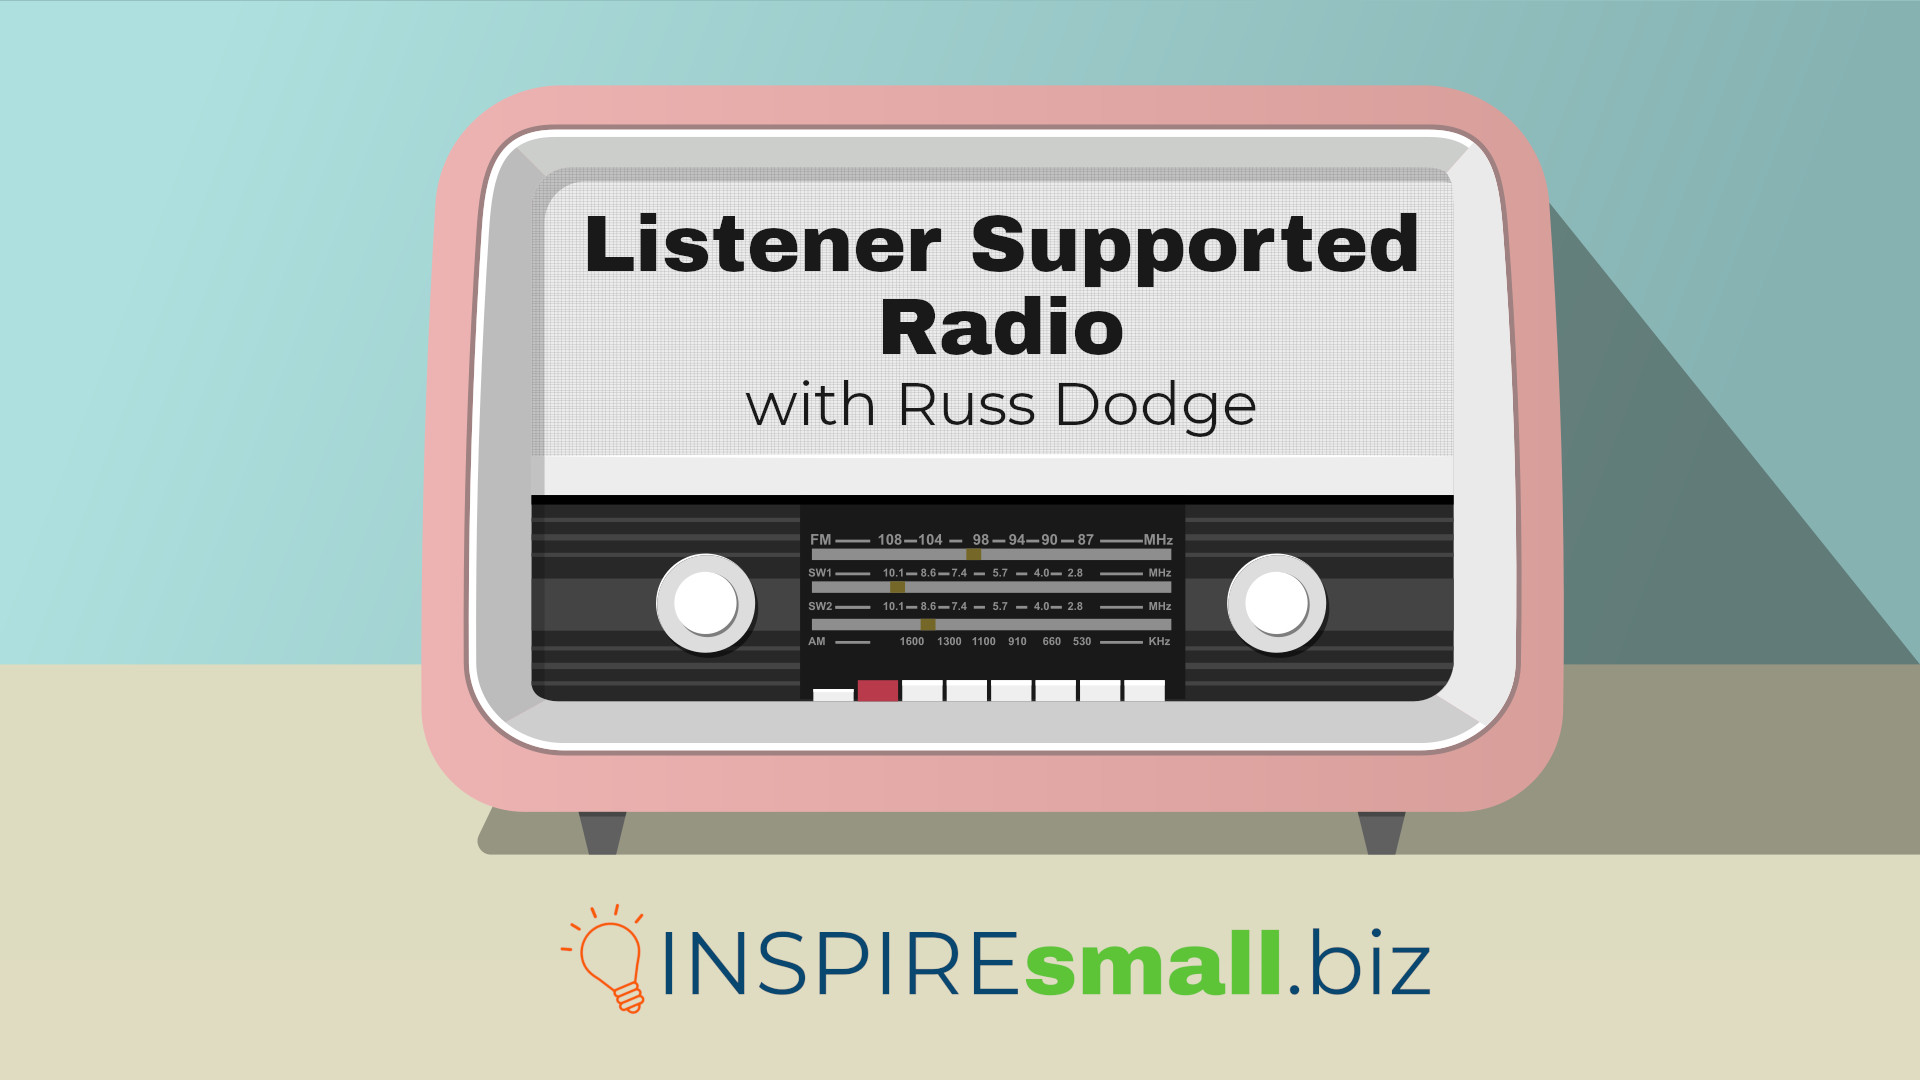 Listener Supported Radio with Russ Dodge, hosted by INSPIREsmall.biz, text over a stylized vintage-looking radio.